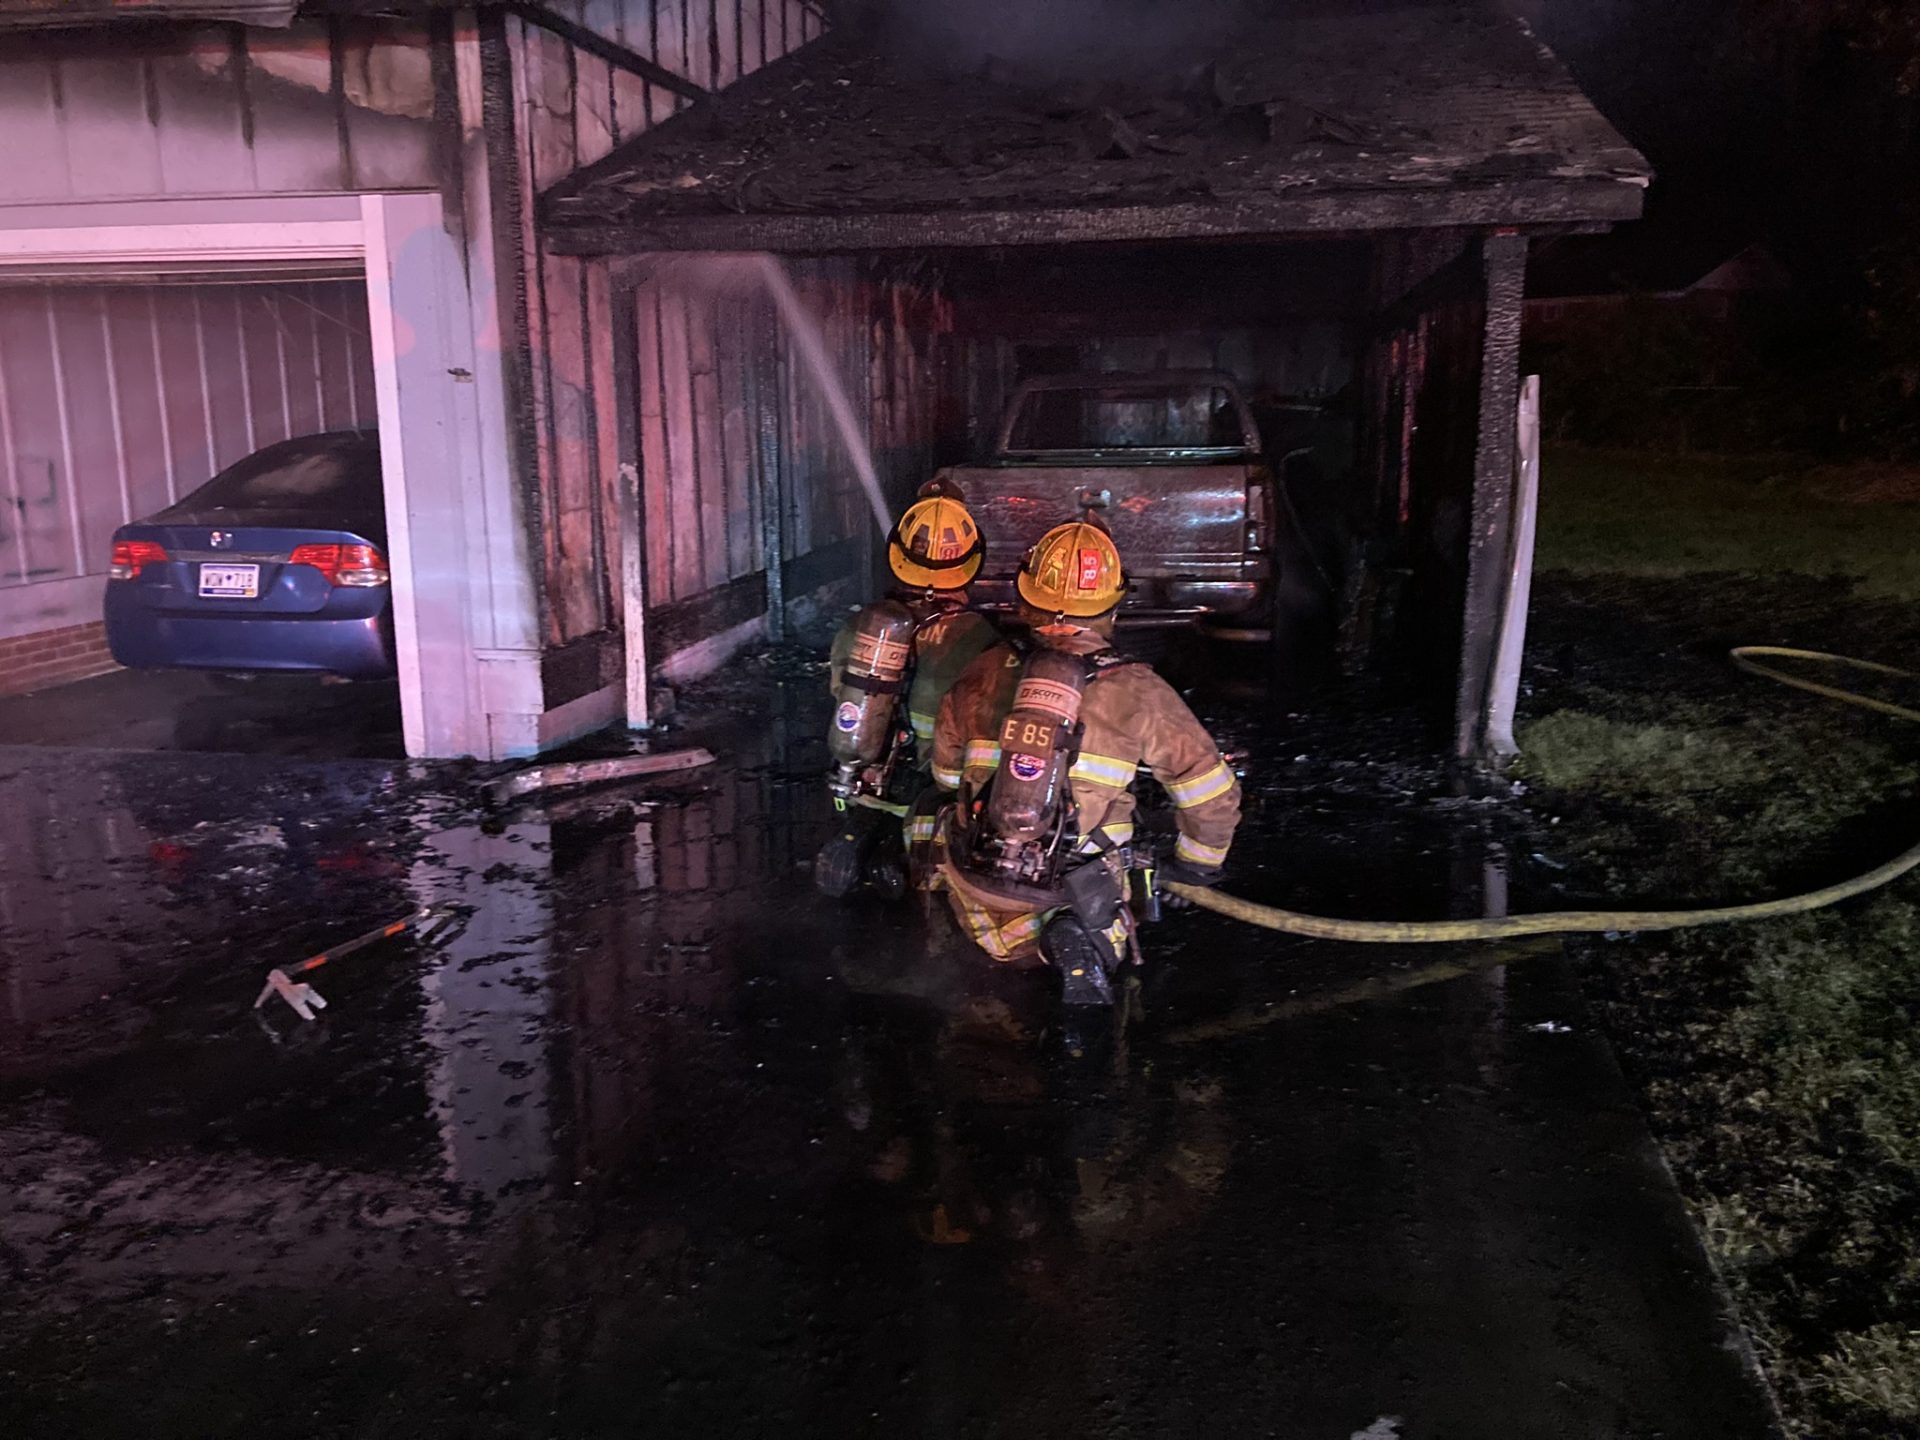 Late Tuesday, July 26, the Burton Fire District, Parris Island Fire Department, Beaufort County EMS and the Beaufot County Sherriff’s Office responded to a house fire on Walnut Street which displaced a family of four adults. Photos courtesy of Burton Fire District